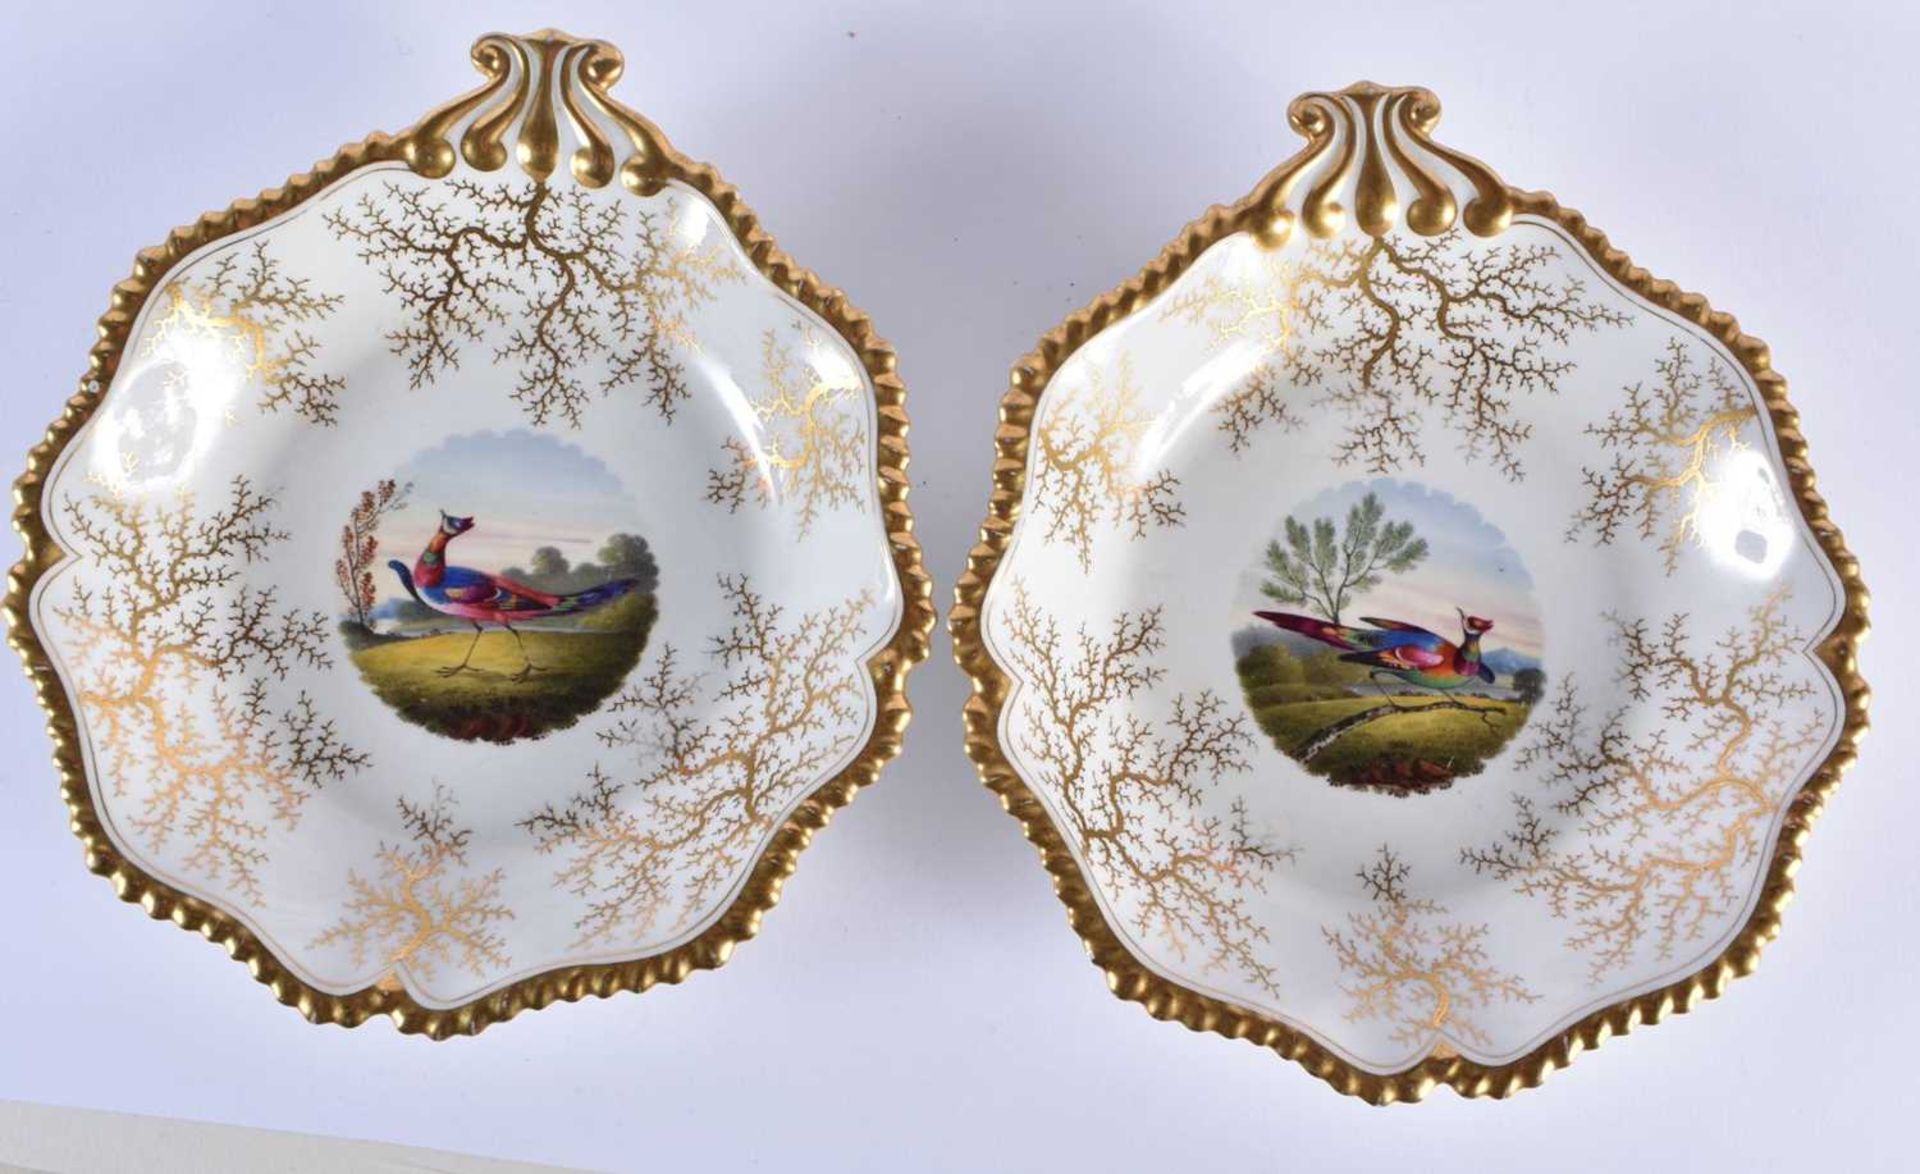 A FINE EARLY 19TH CENTURY FLIGHT BARR AND BARR WORCESTER DESSERT SERVICE painted with landscapes and - Image 7 of 32